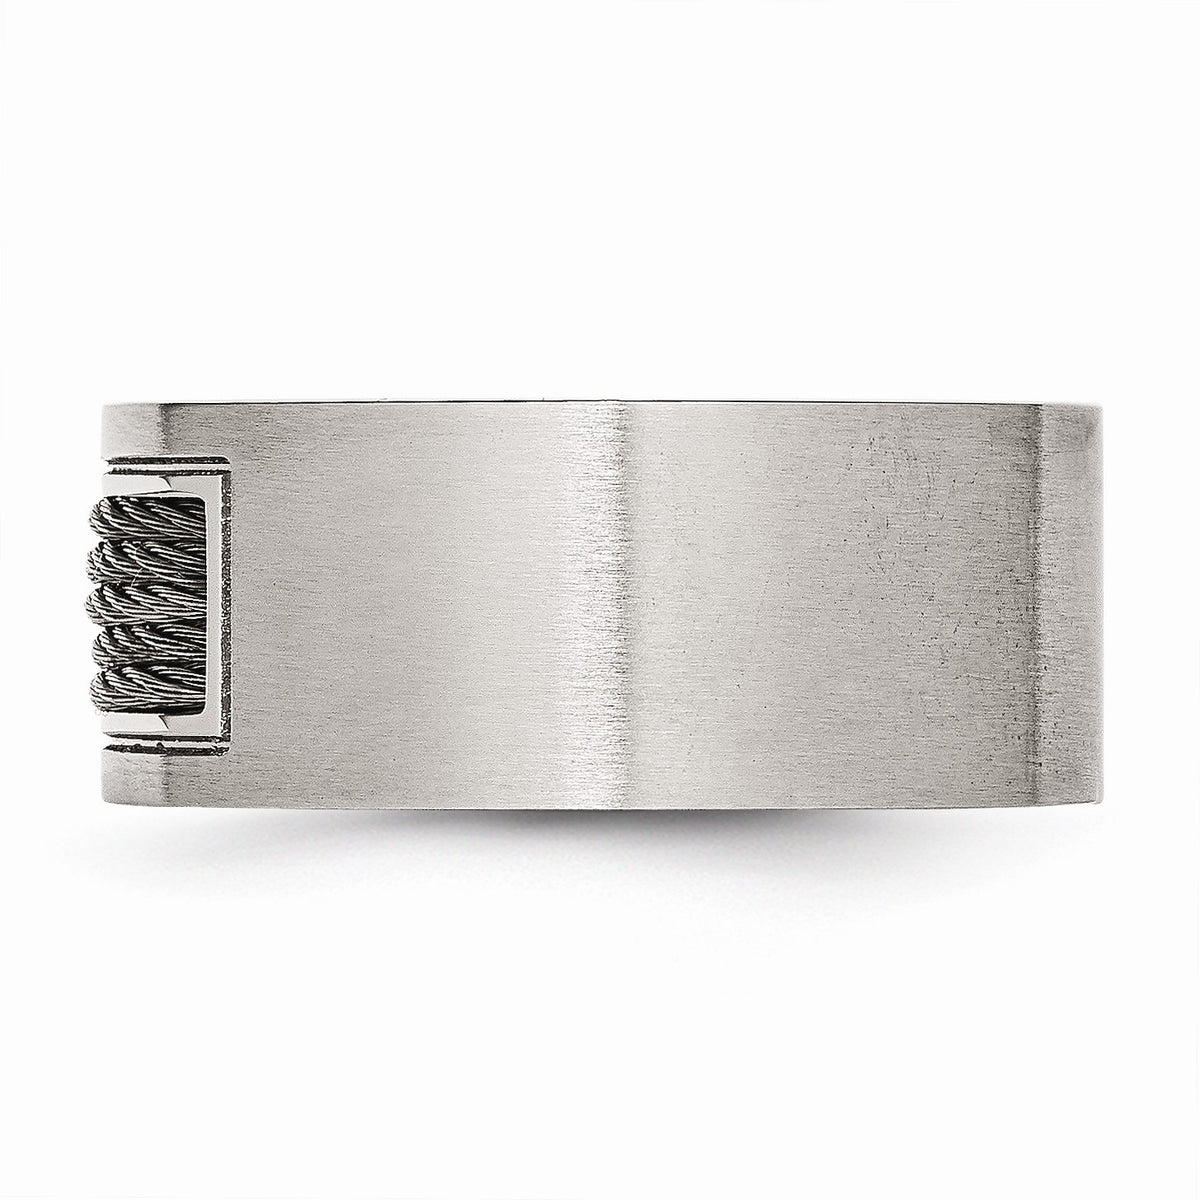 Alternate view of the Stainless Steel 10mm Wire Inset Comfort Fit Band by The Black Bow Jewelry Co.